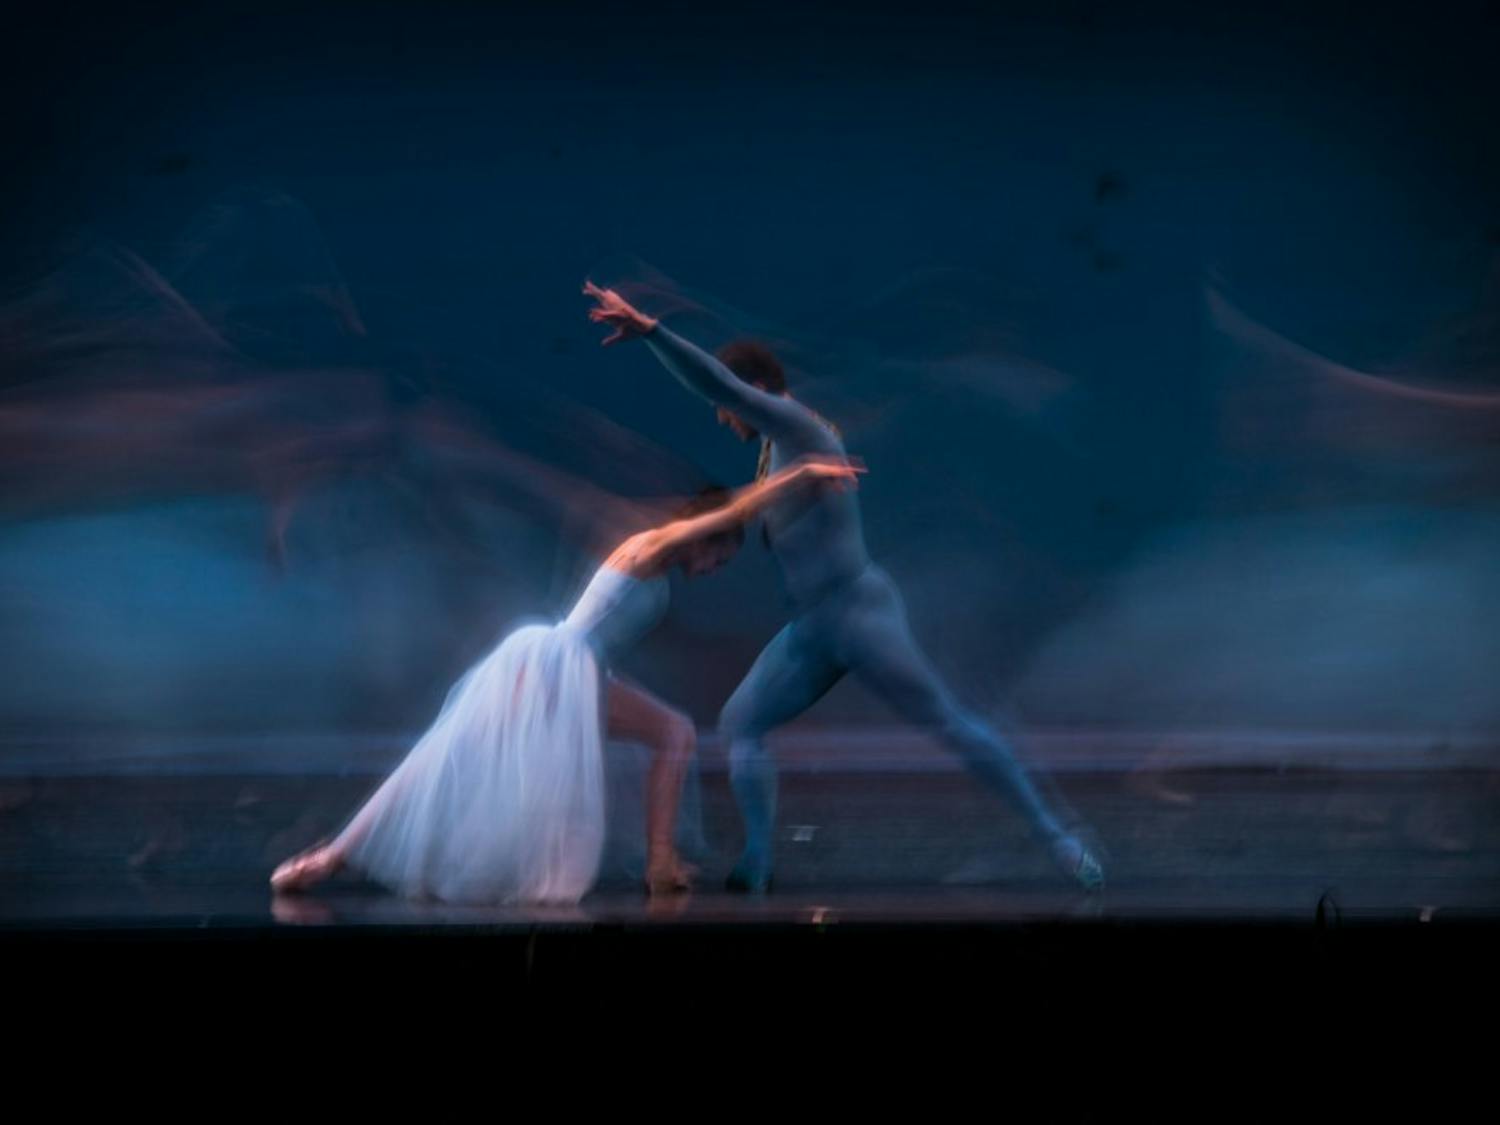 Long exposure of dancers performing “Serenade” during Ballet Stars of New York at the Township Auditorium.